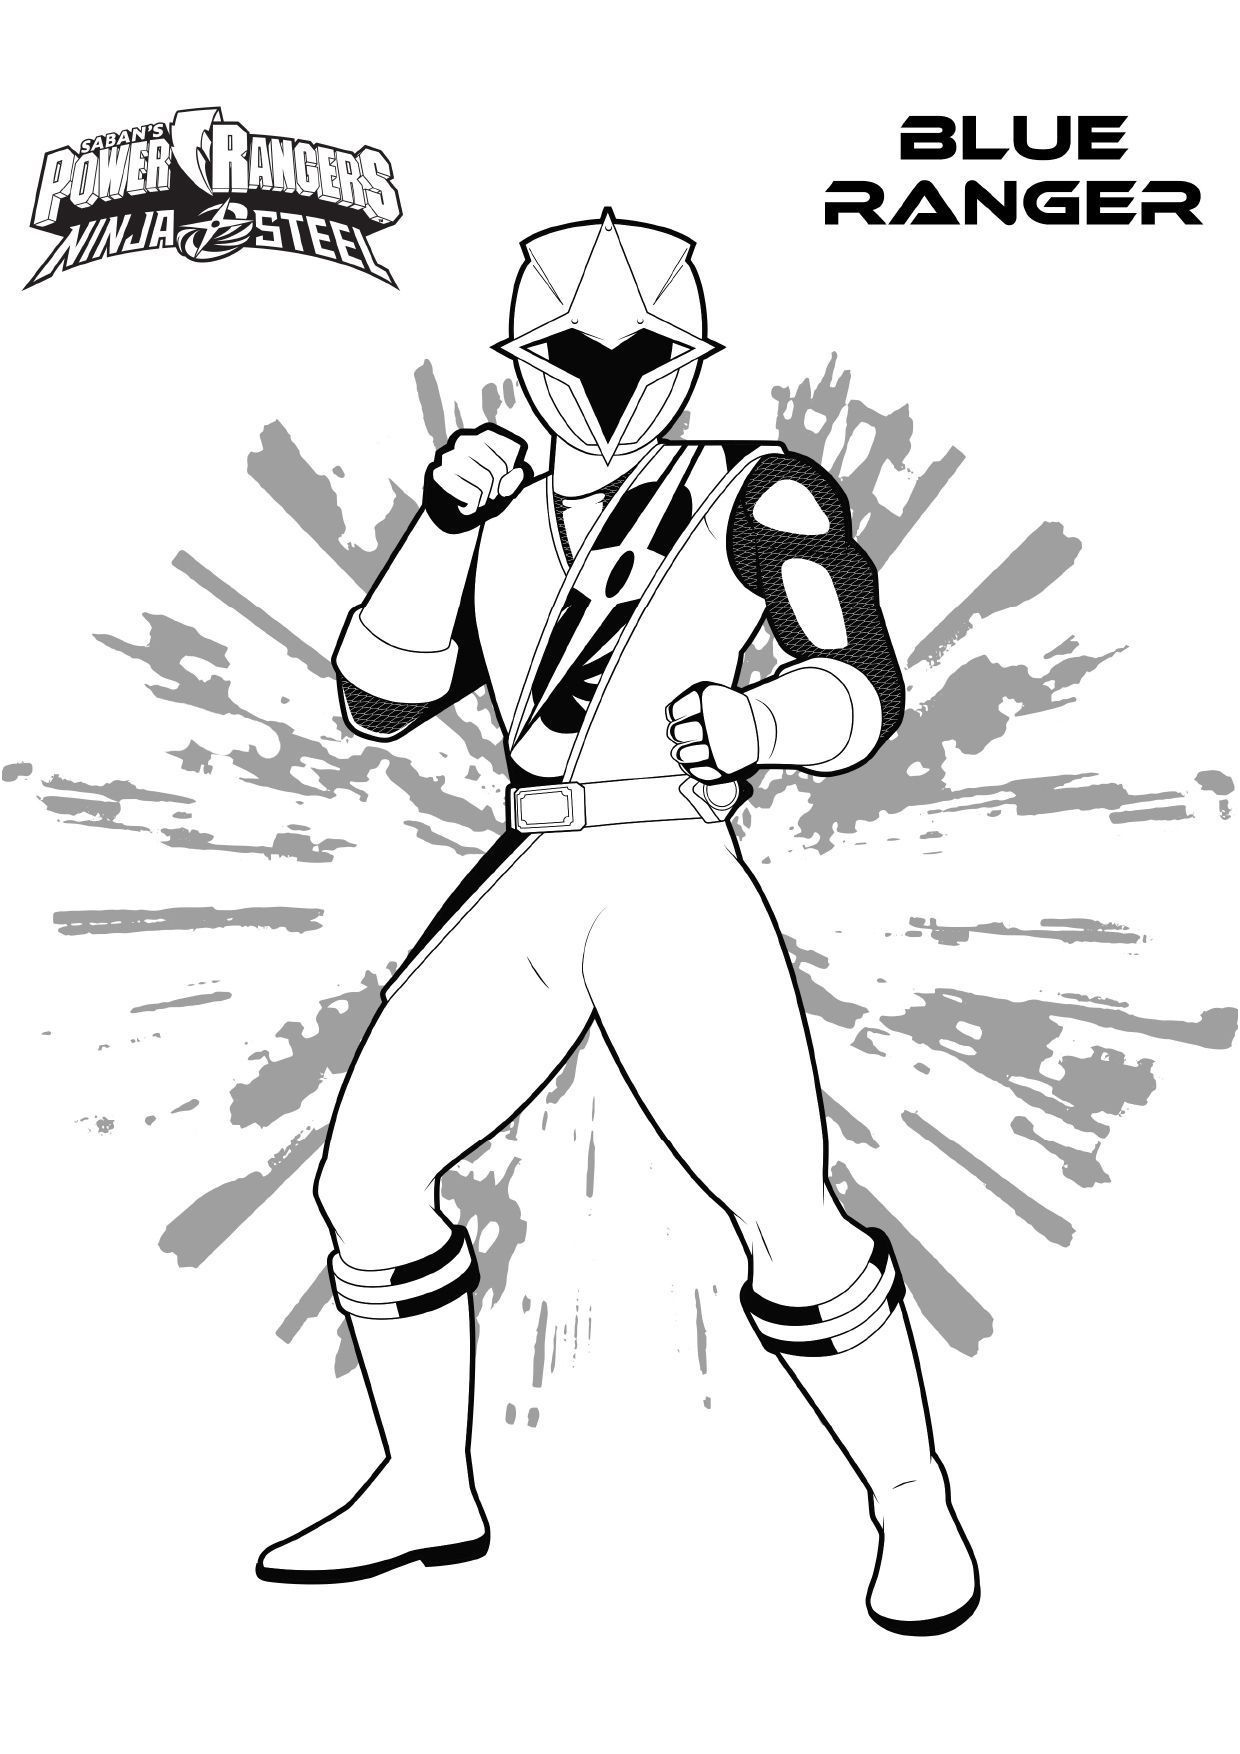 Power Ranger Ninja Steel Mask Coloring Page Coloring Pages pour Power Rangers Dessin Facile